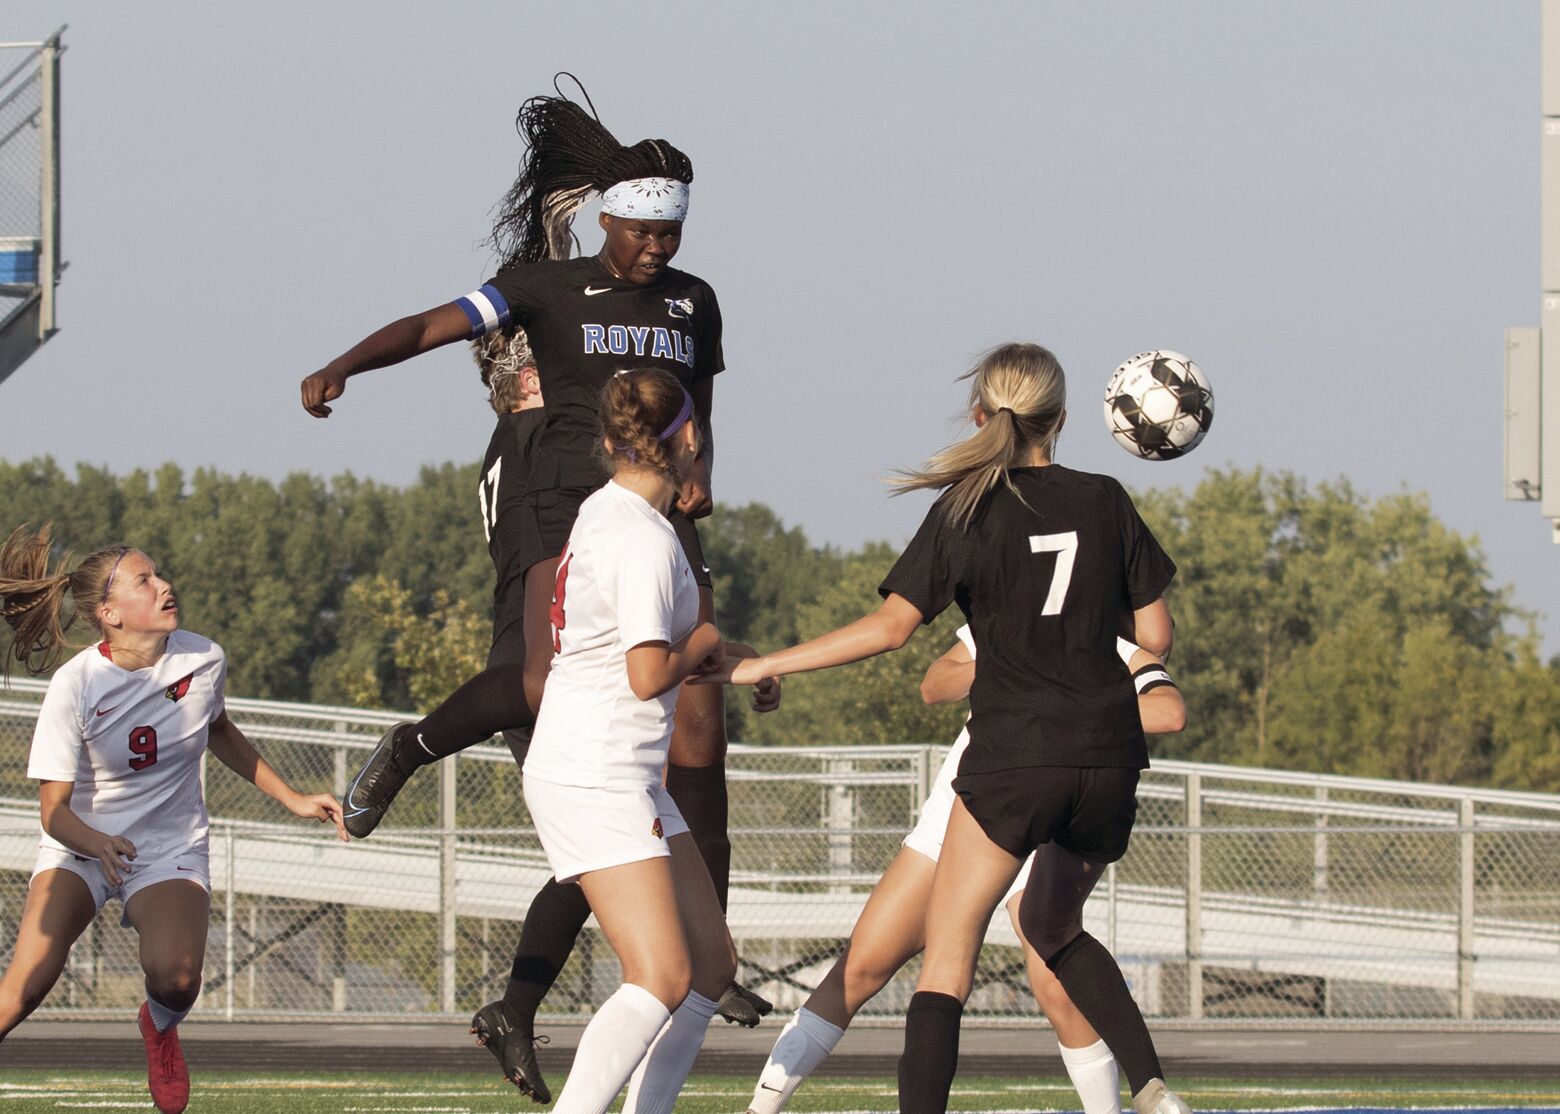 Rogers Girls Soccer Dominates Coon Rapids Cardinals with 6-0 Victory to Extend Undefeated Streak to 3-0